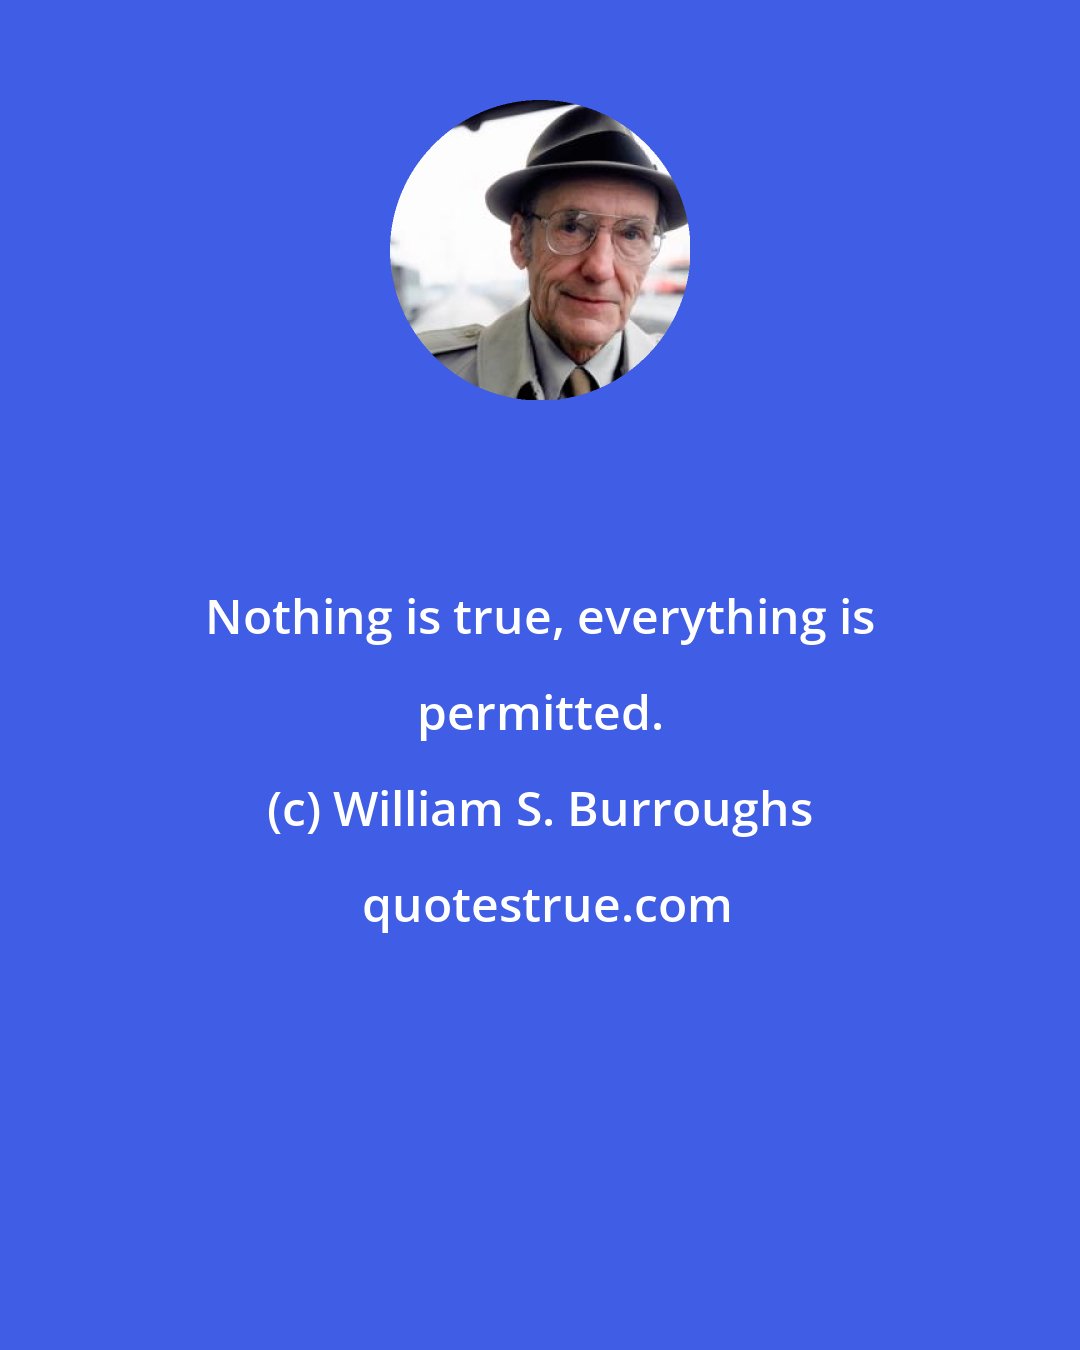 William S. Burroughs: Nothing is true, everything is permitted.